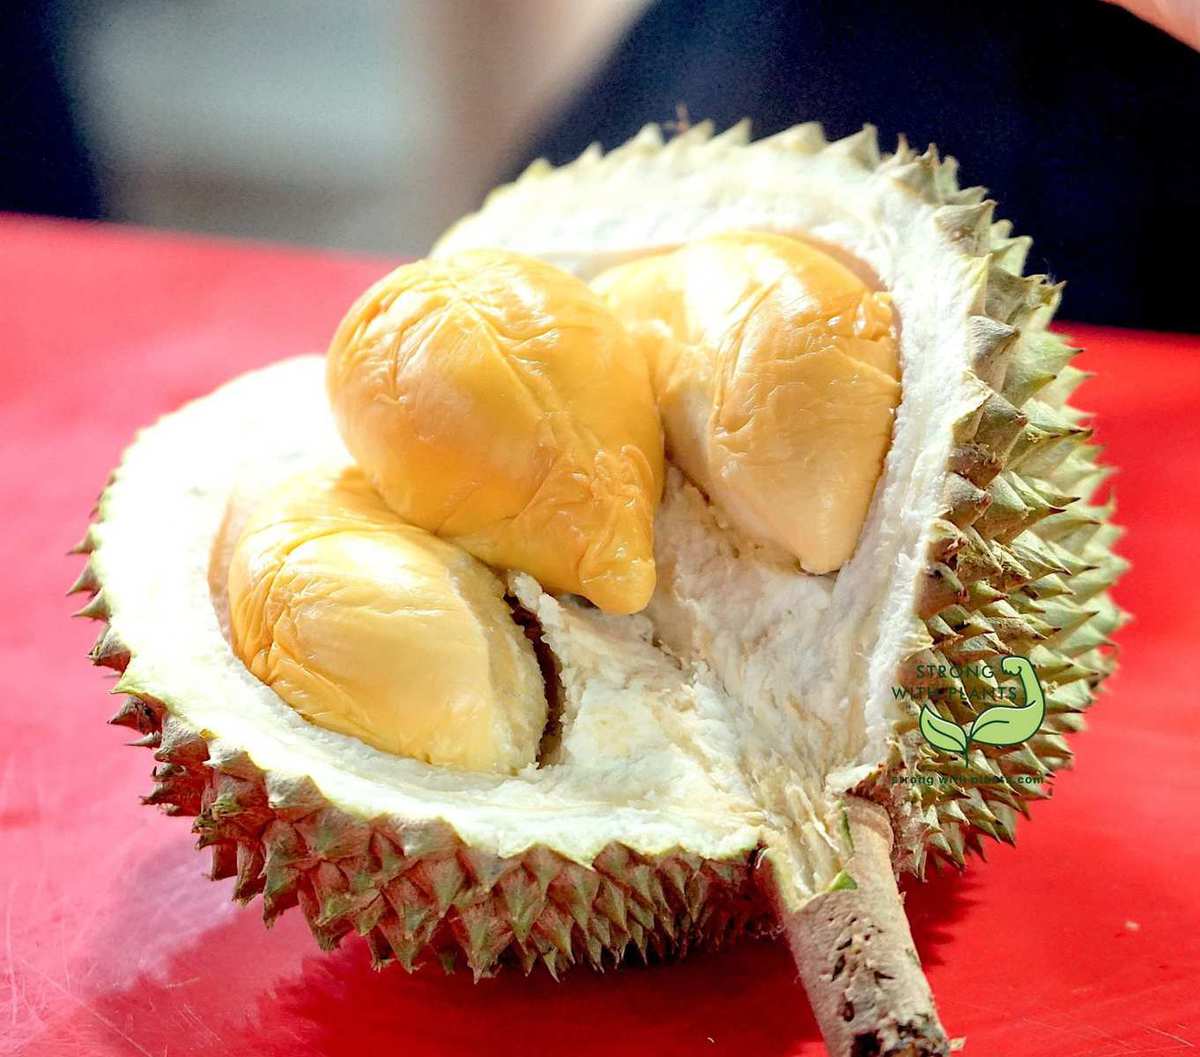 How to Avoid Bad Durian and Not to Be Scammed by a Durian Vendor